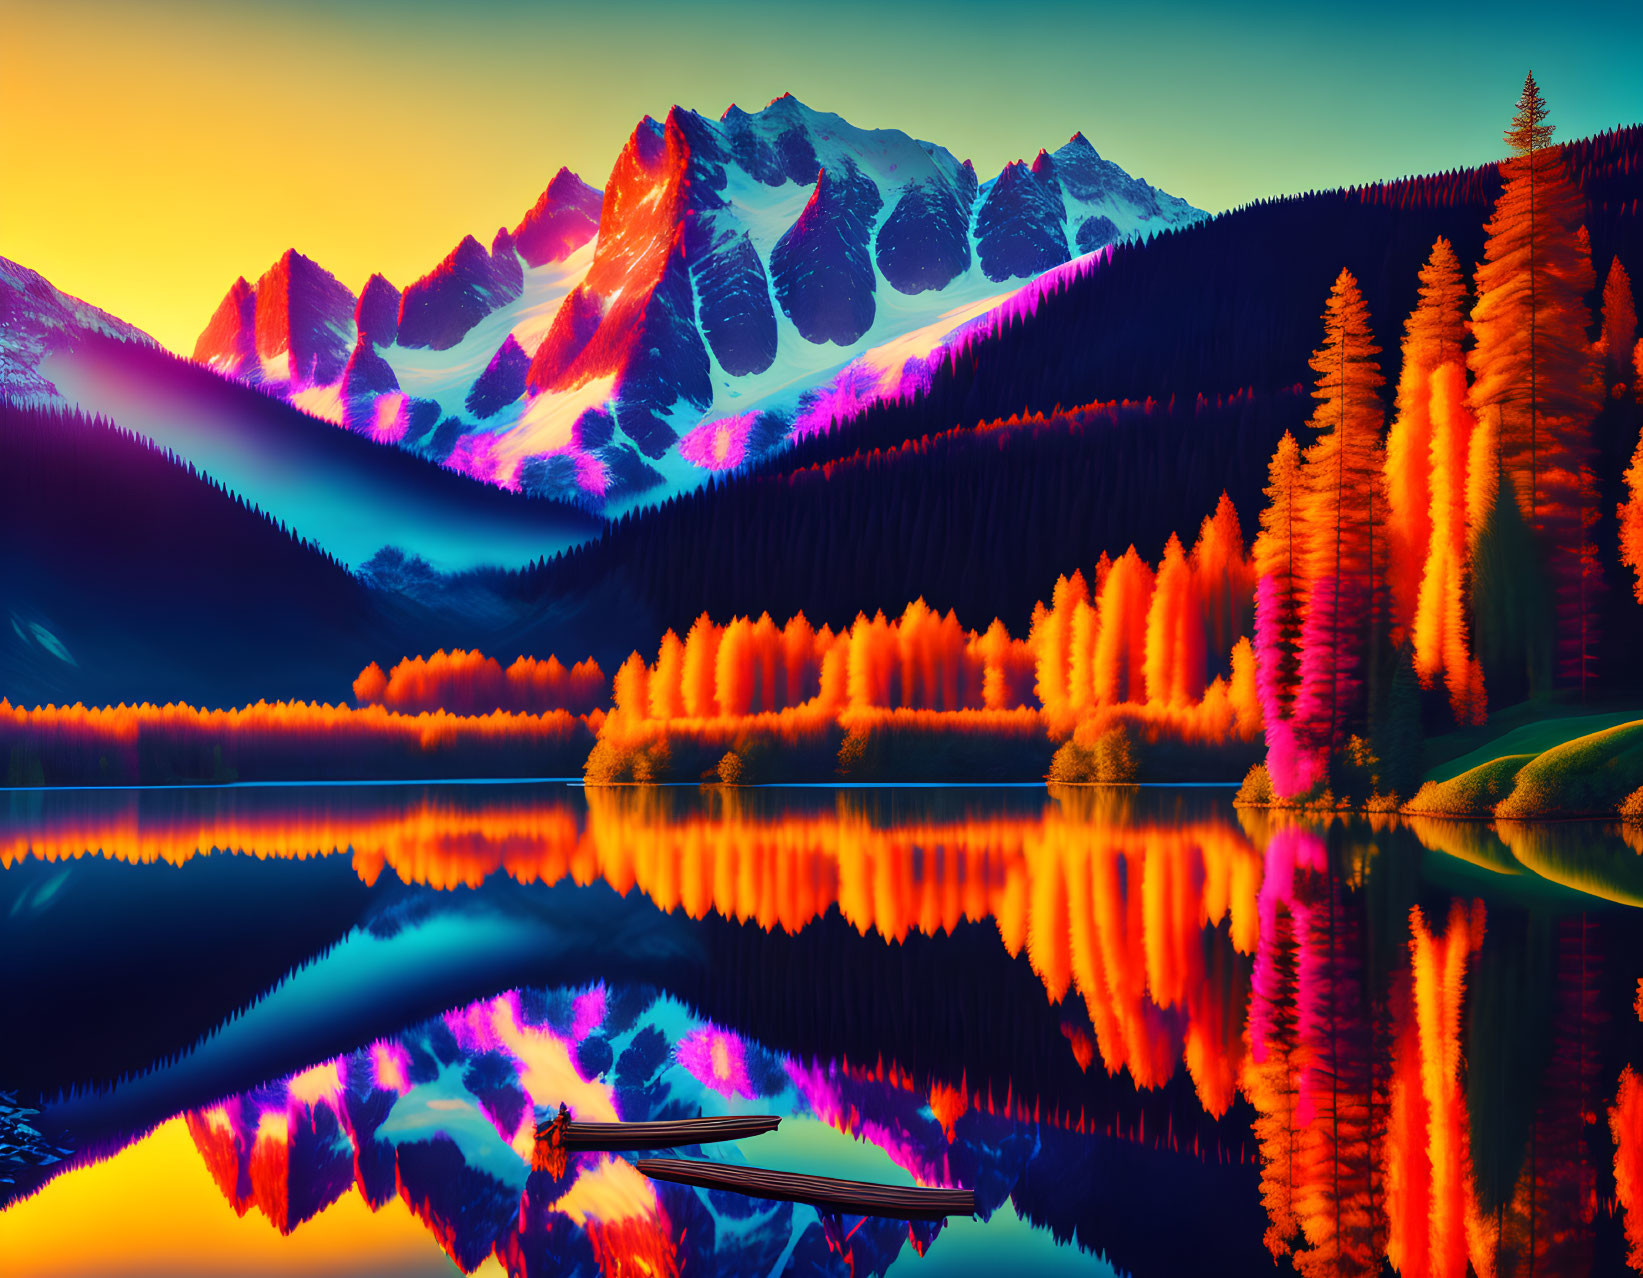 Colorful Mountain Landscape with Reflective Lake and Boat at Sunset